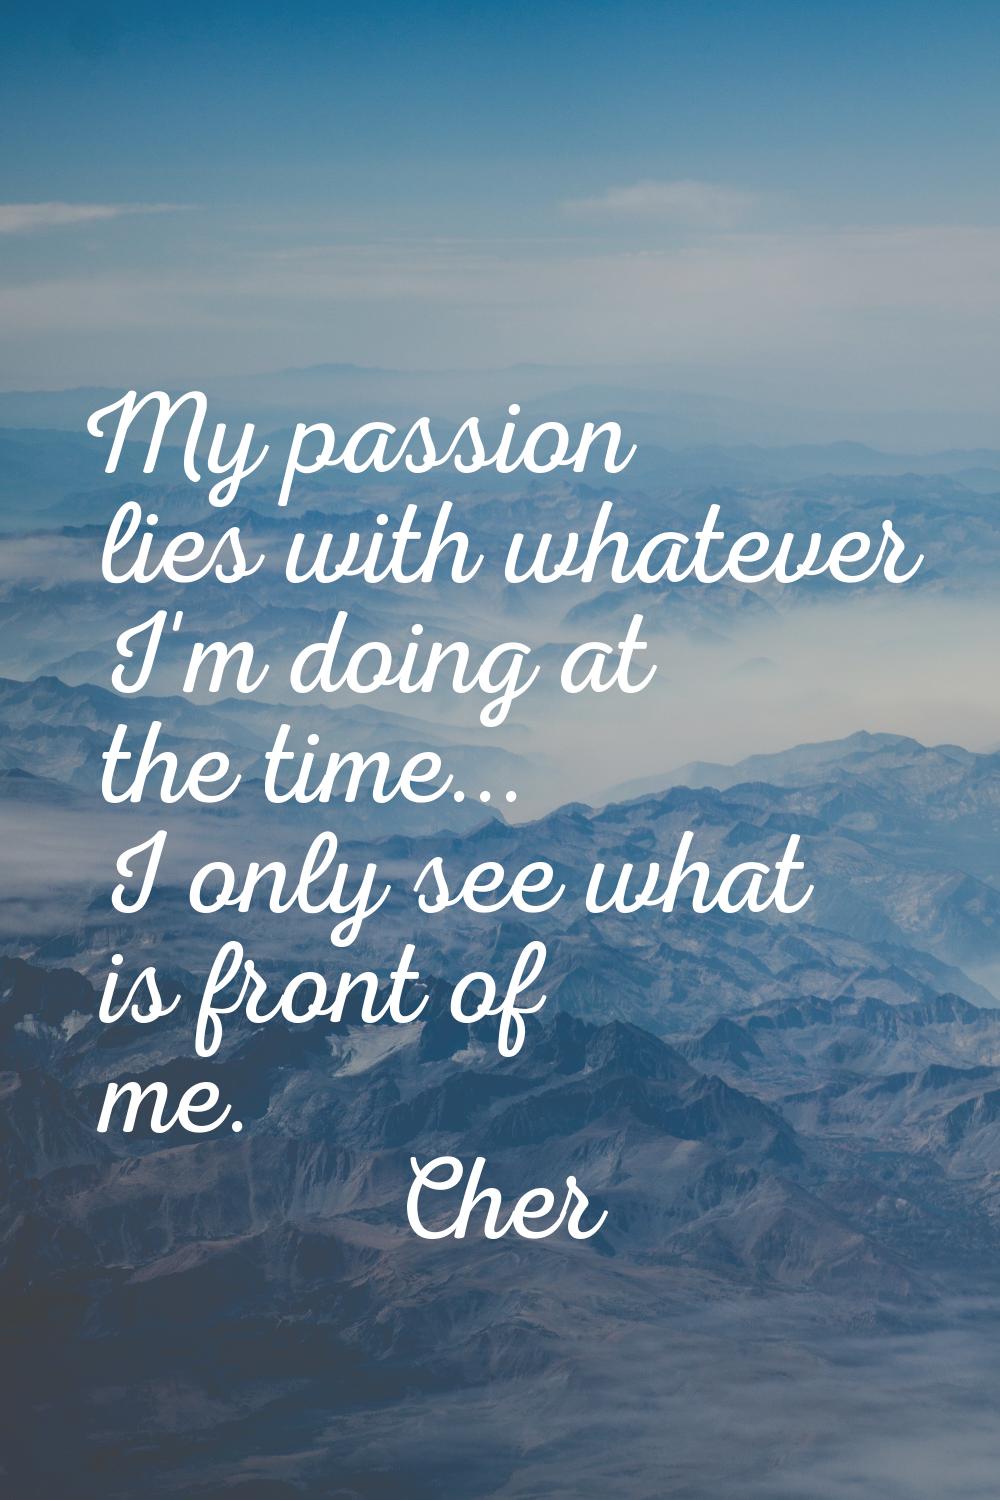 My passion lies with whatever I'm doing at the time... I only see what is front of me.